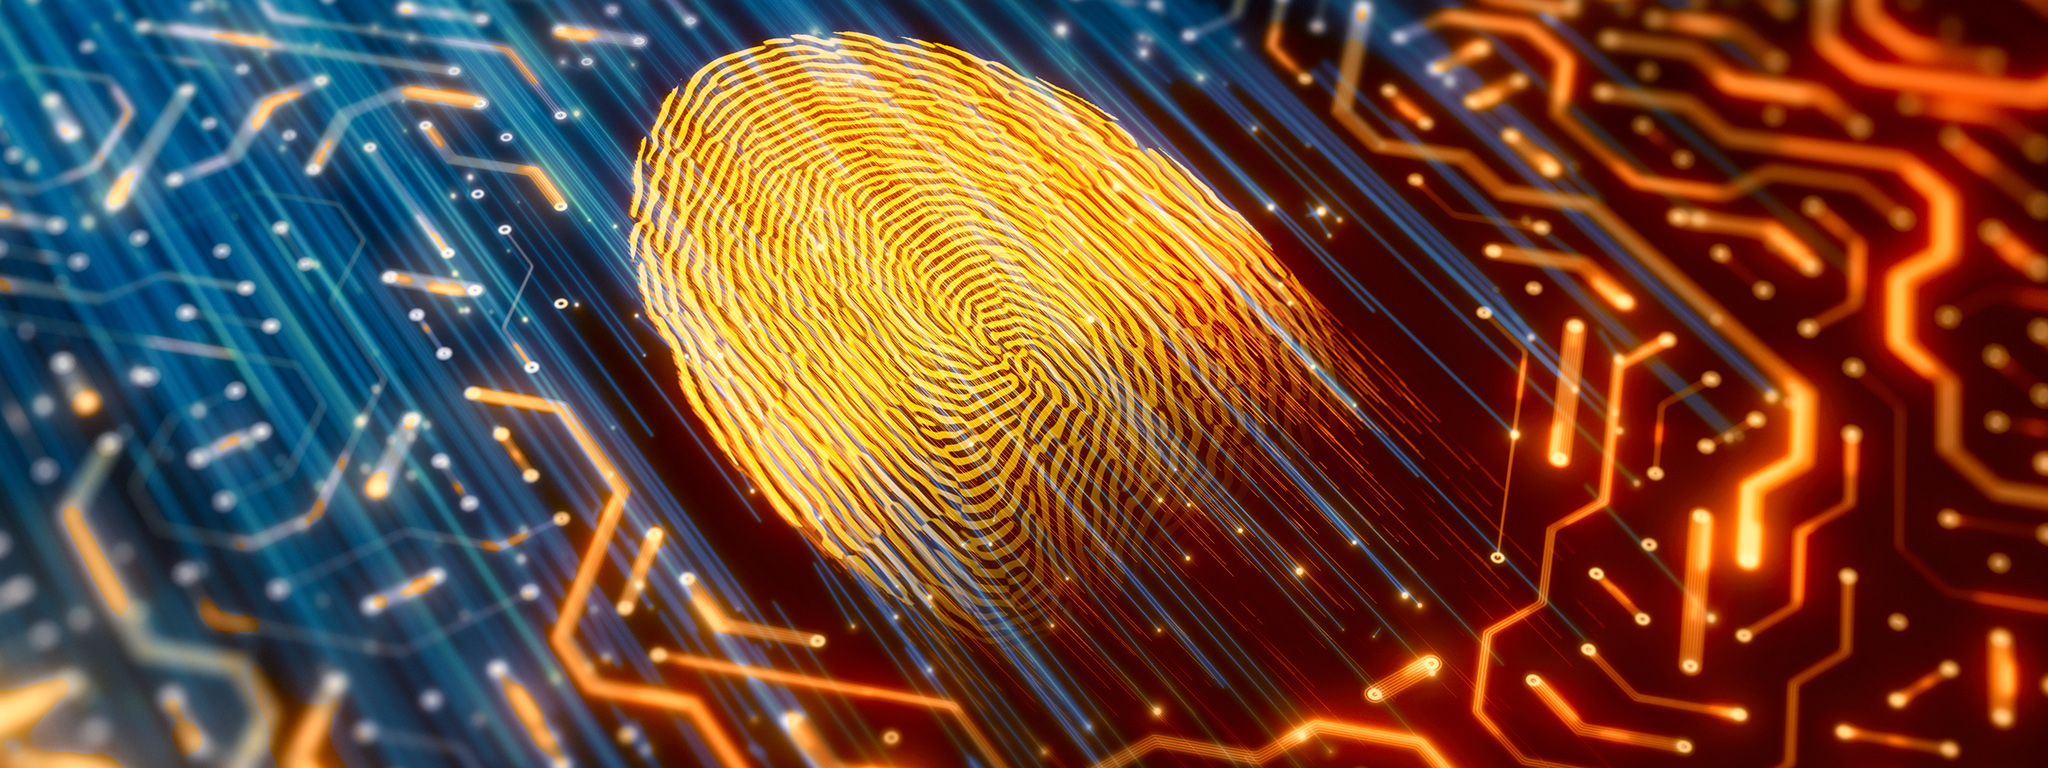 A thumbprint illuminated in gold on a dark circuit board with orange and blue glowing circuits